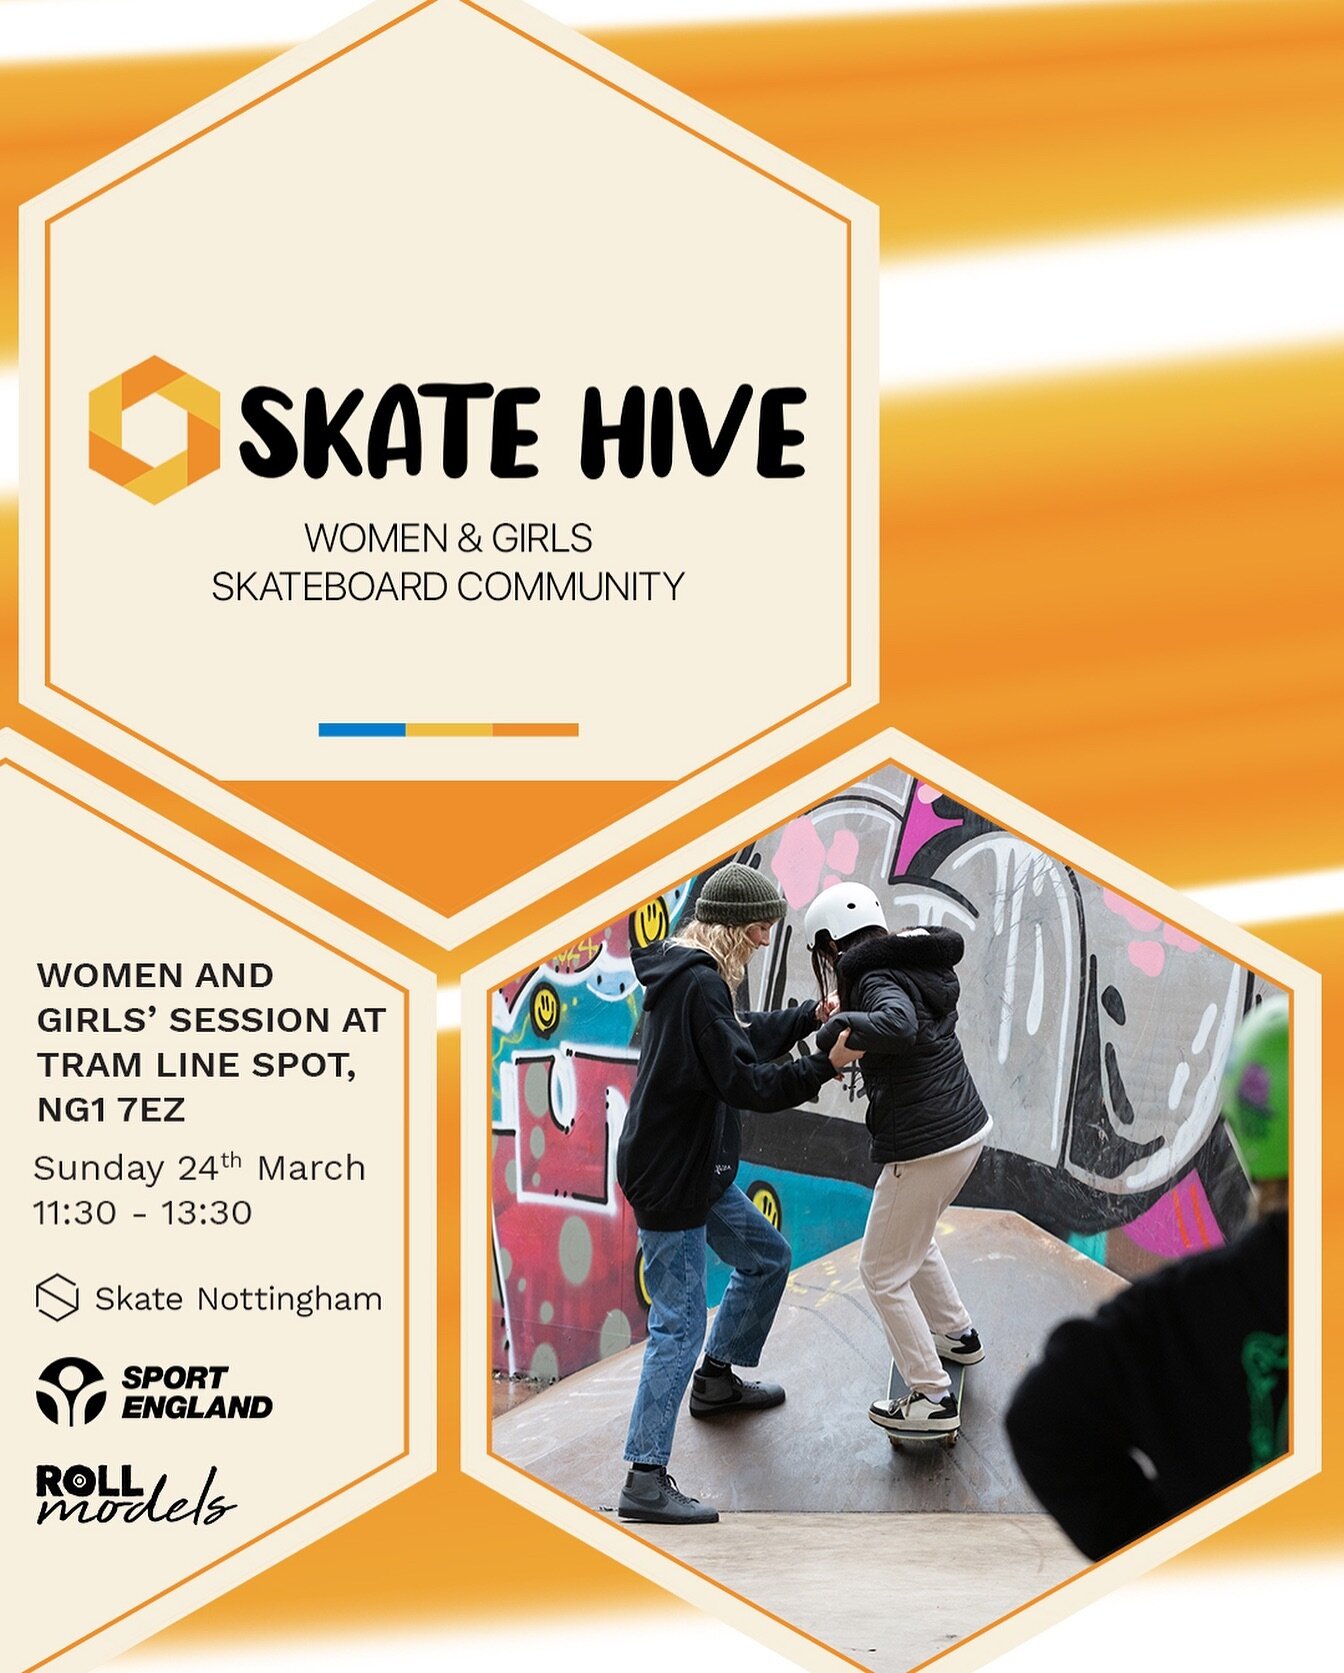 Skate Hive continues at @tramlinespot this Sunday, 11:30 - 13:30!⁣
⁣
Join other women &amp; girls for a relaxed skate session with coaches on hand. Let us know you&rsquo;re coming by booking a free ticket via our website! Boards &amp; helmets availab